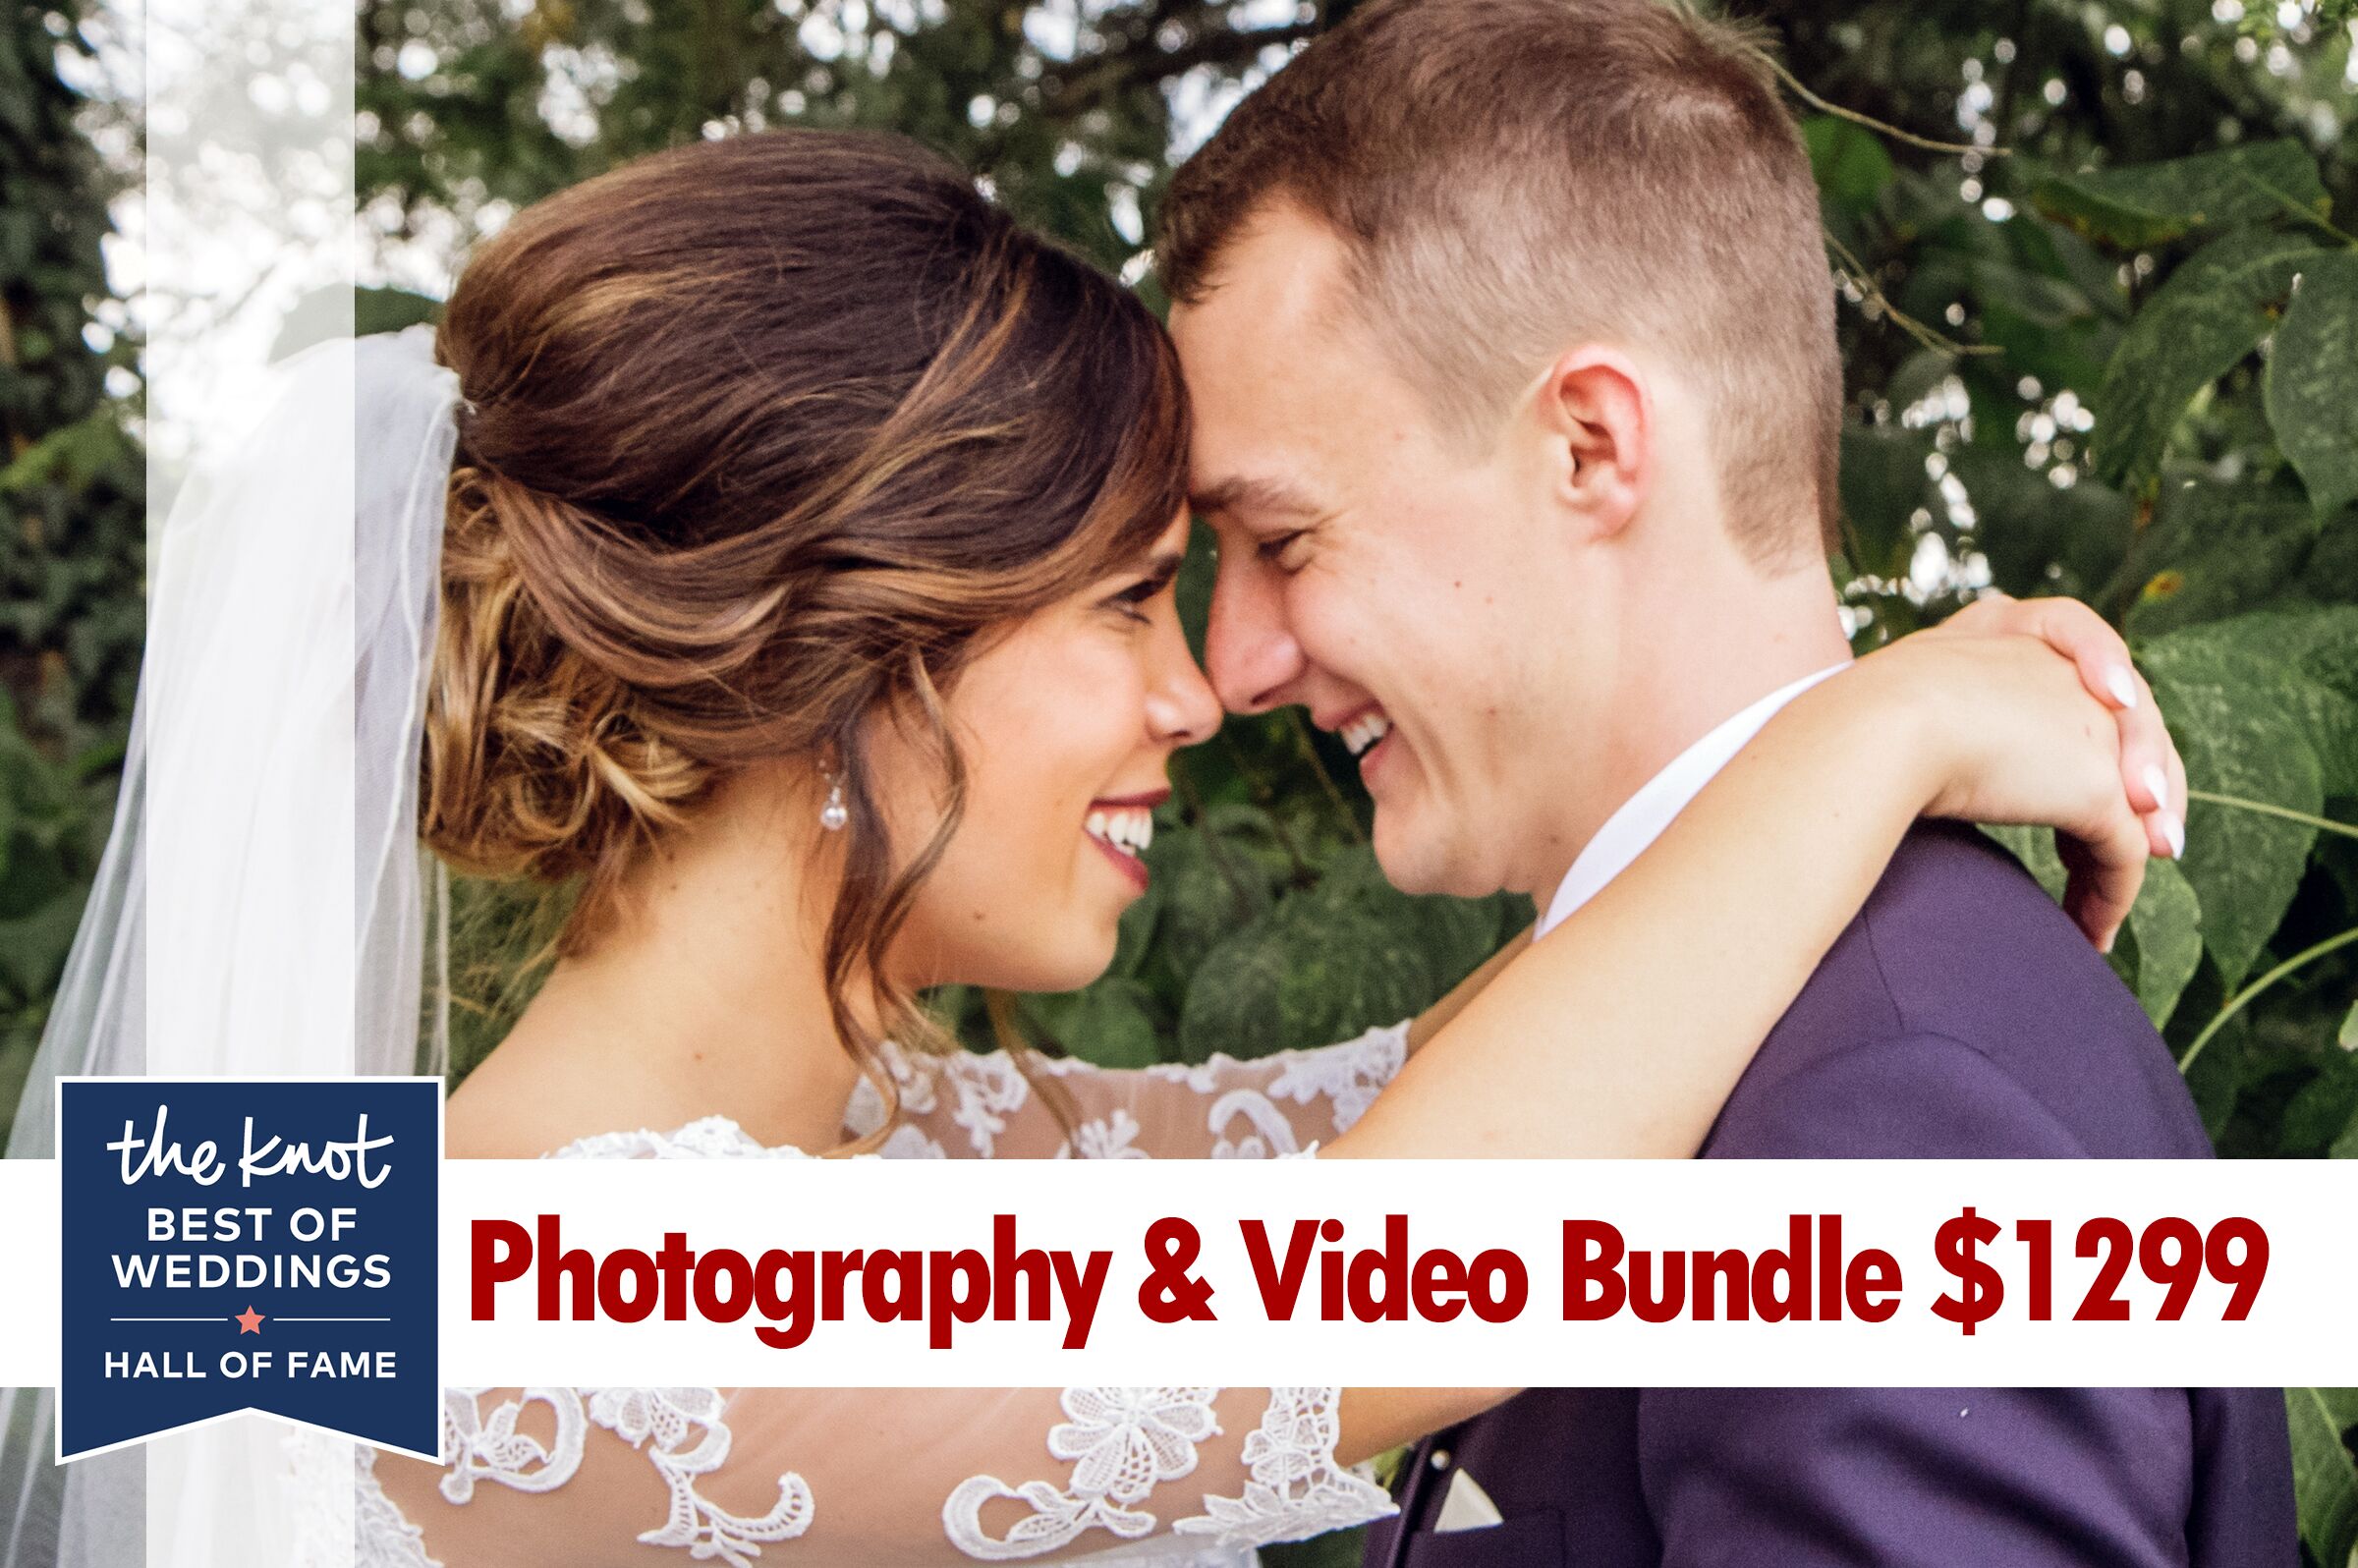 How Much to Spend On Wedding Favors - Eivan's Photo & Video